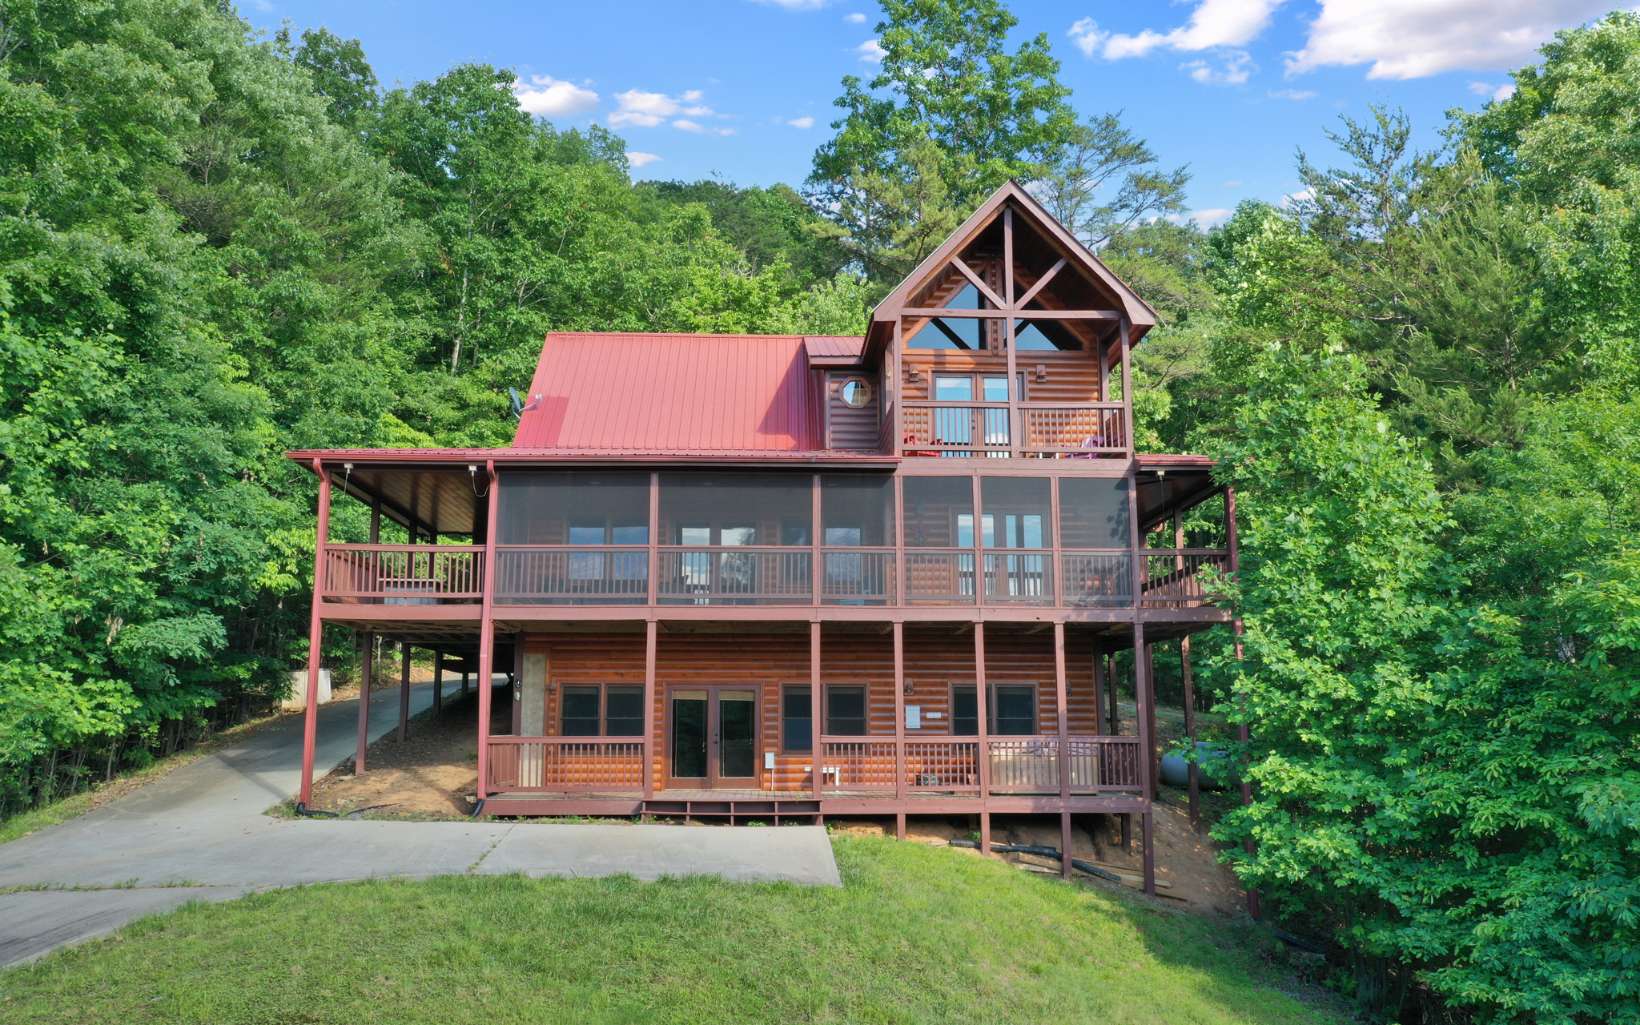 Bring All the Family or your Favorite Friends to this Gorgeous Cabin in the North Ga. Mountains situated on one of the highest peaks around. 3 BR/ 3 BA Log Sided Cabin with a Long-Range Mountain View (Improved with a small amount of tree topping). All paved access & less than 15 minutes to downtown Blue Ridge, Blue Ridge Lake or the Toccoa River. Huge screen porch on the view side, wrap around porches, metal roof. Master offers a private porch, fireplace, spacious master bath, jetted tub & tile shower & double vanities. A mini split system for added comfort. Actually, you could have 2 masters no problem. The lower-level game room & the living area on the main floor are very accommodating for several people to gather. Prepare your meals while enjoying the mountain view, then sit at the separate dining area, same great view. On demand hot water, Plenty of parking here, circle drive + det. garage.